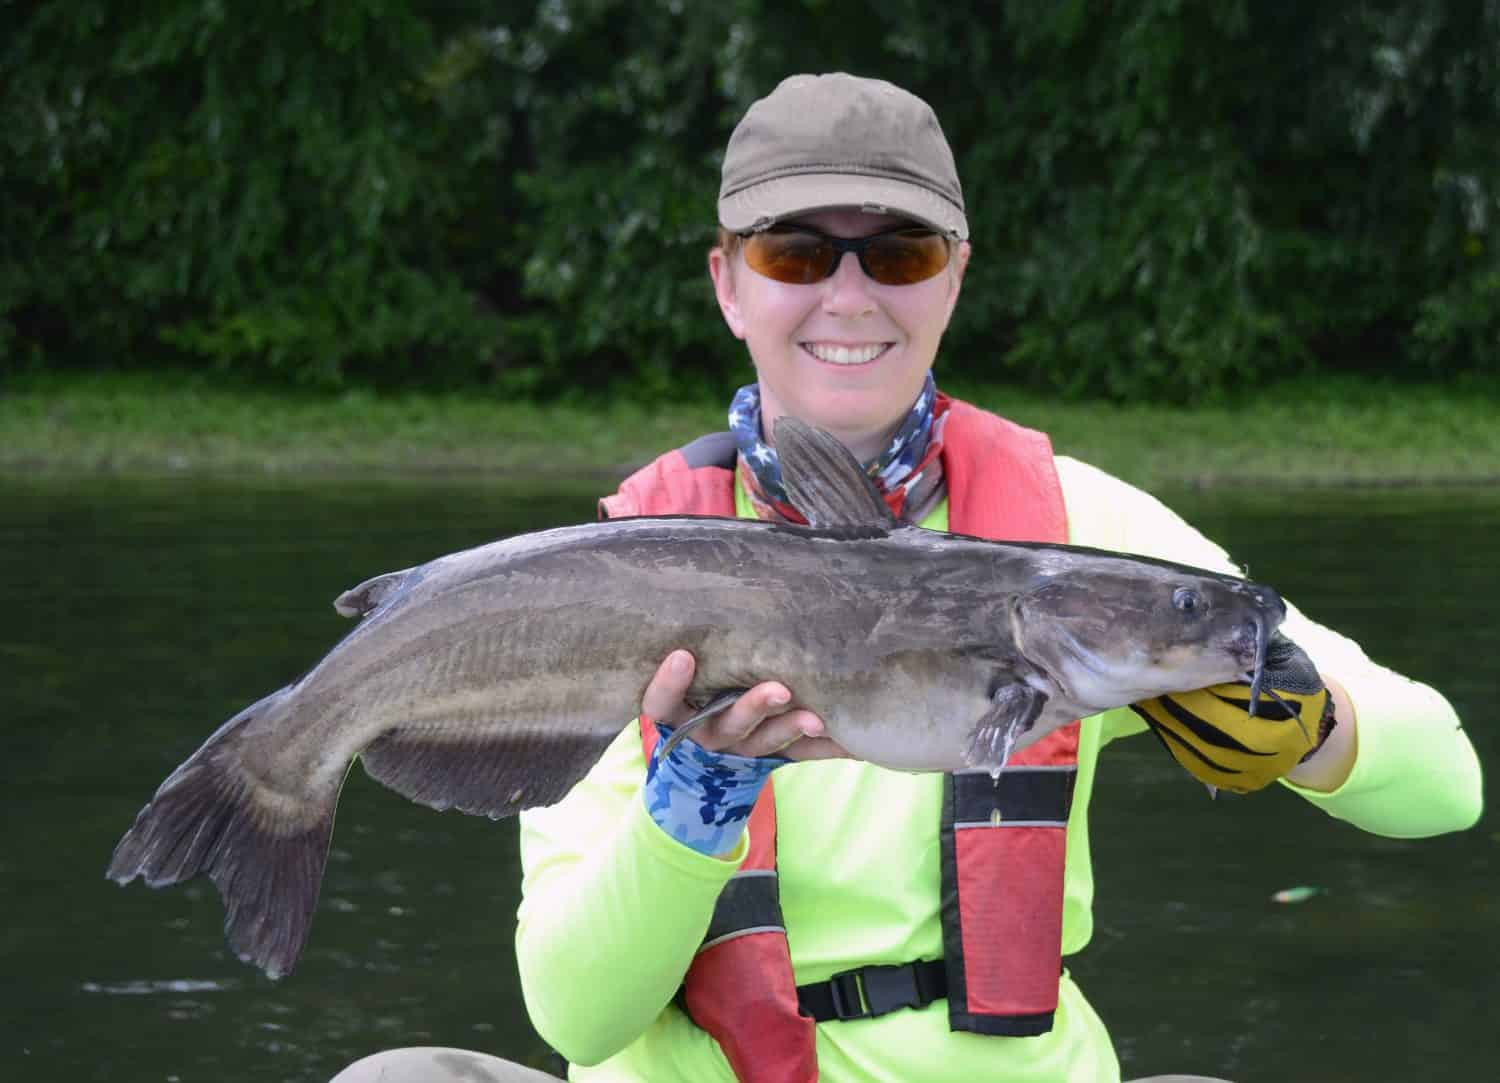 A large dark gray channel catfish fish being held horizontally by smiling short haired woman in a baseball cap and gloves on a bright river on a bright summer day